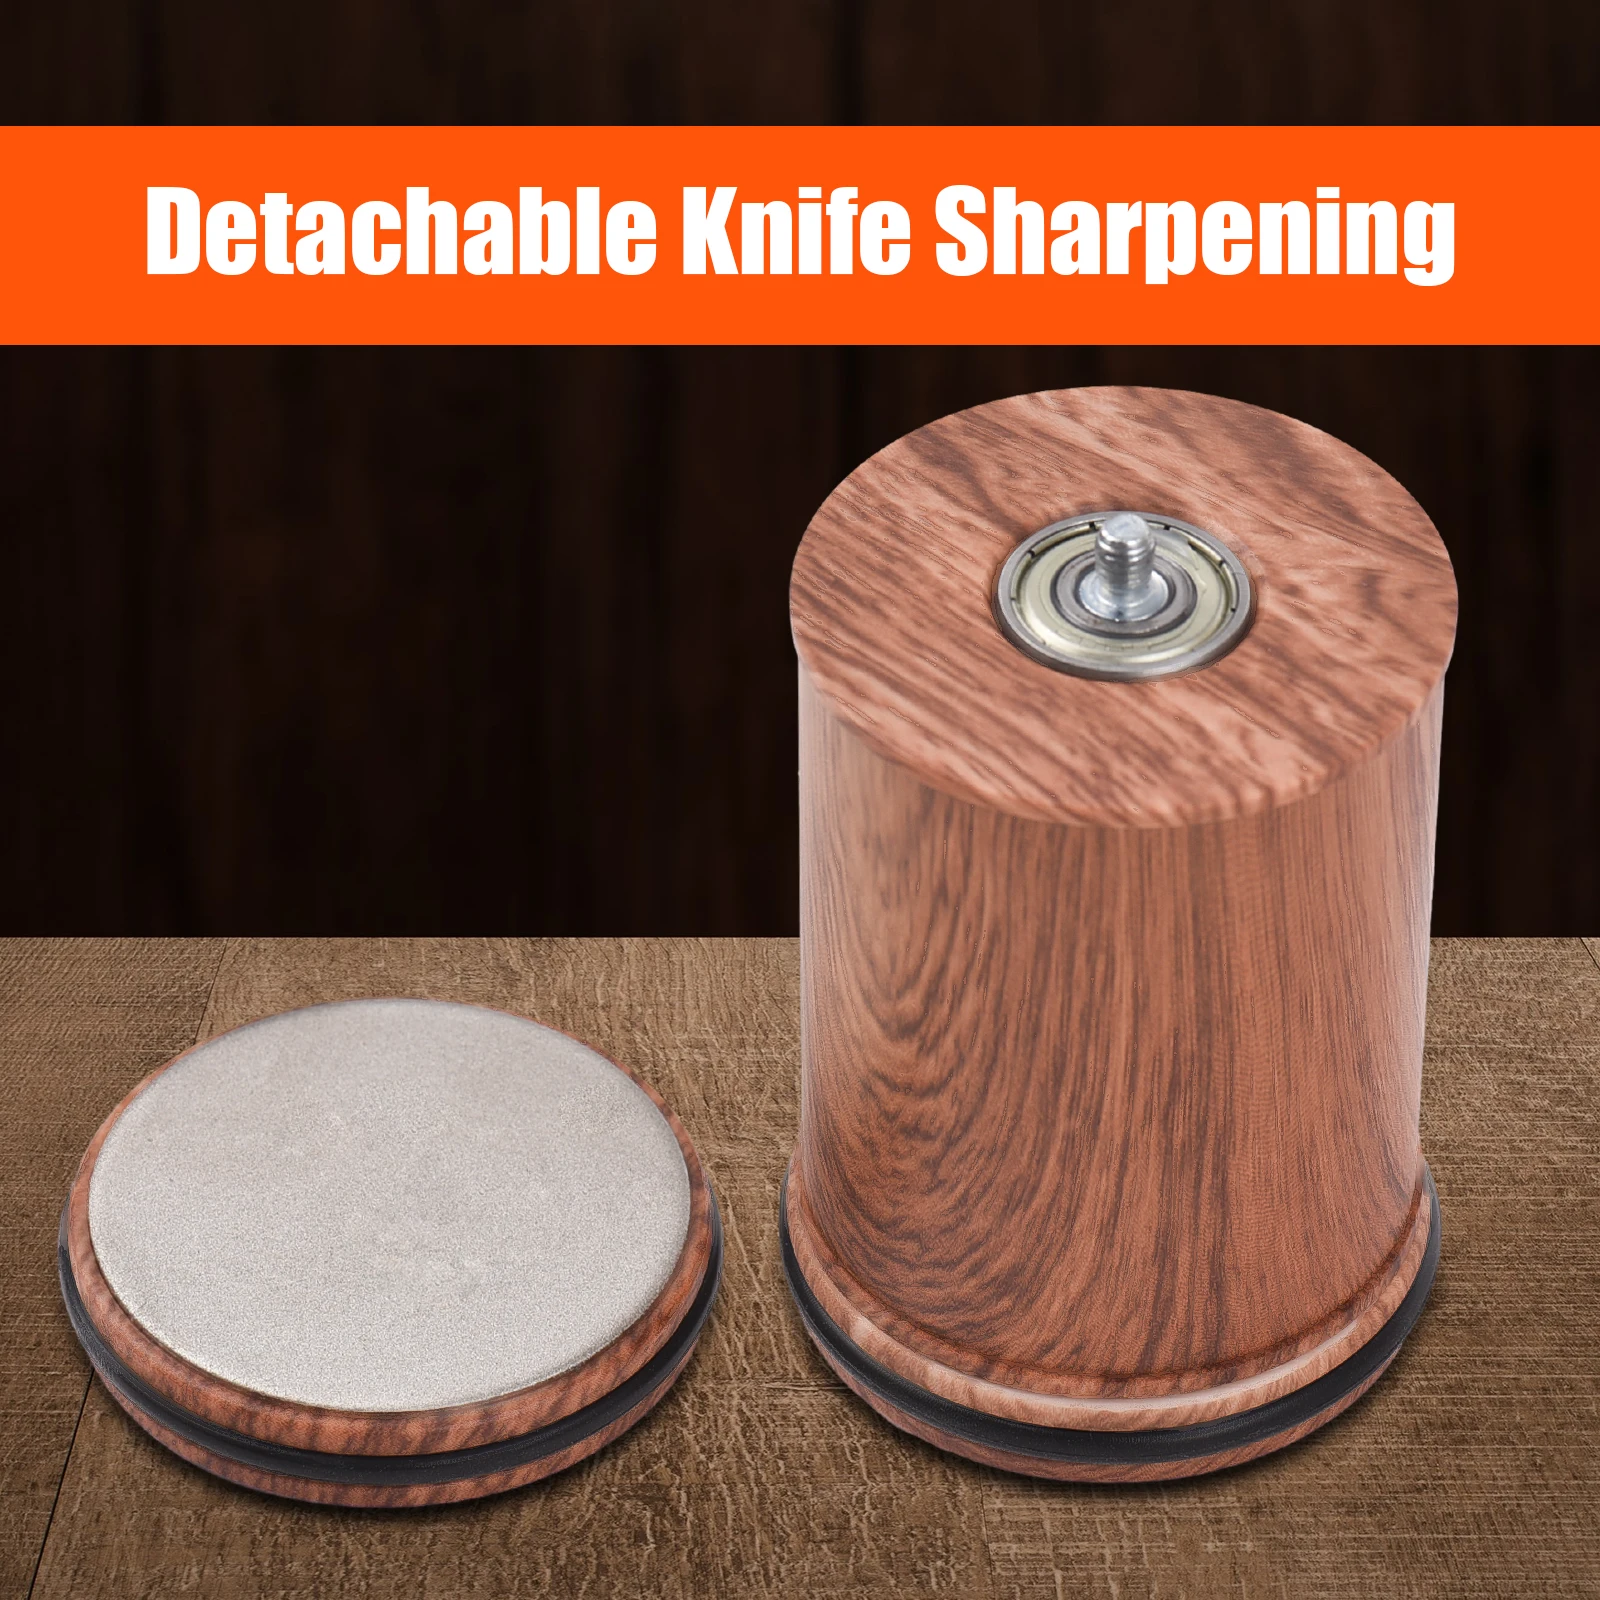 Are you as frustrated about knife sharpeners as we are? Try the Tumbler  Rolling Knife Sharpener in 2023